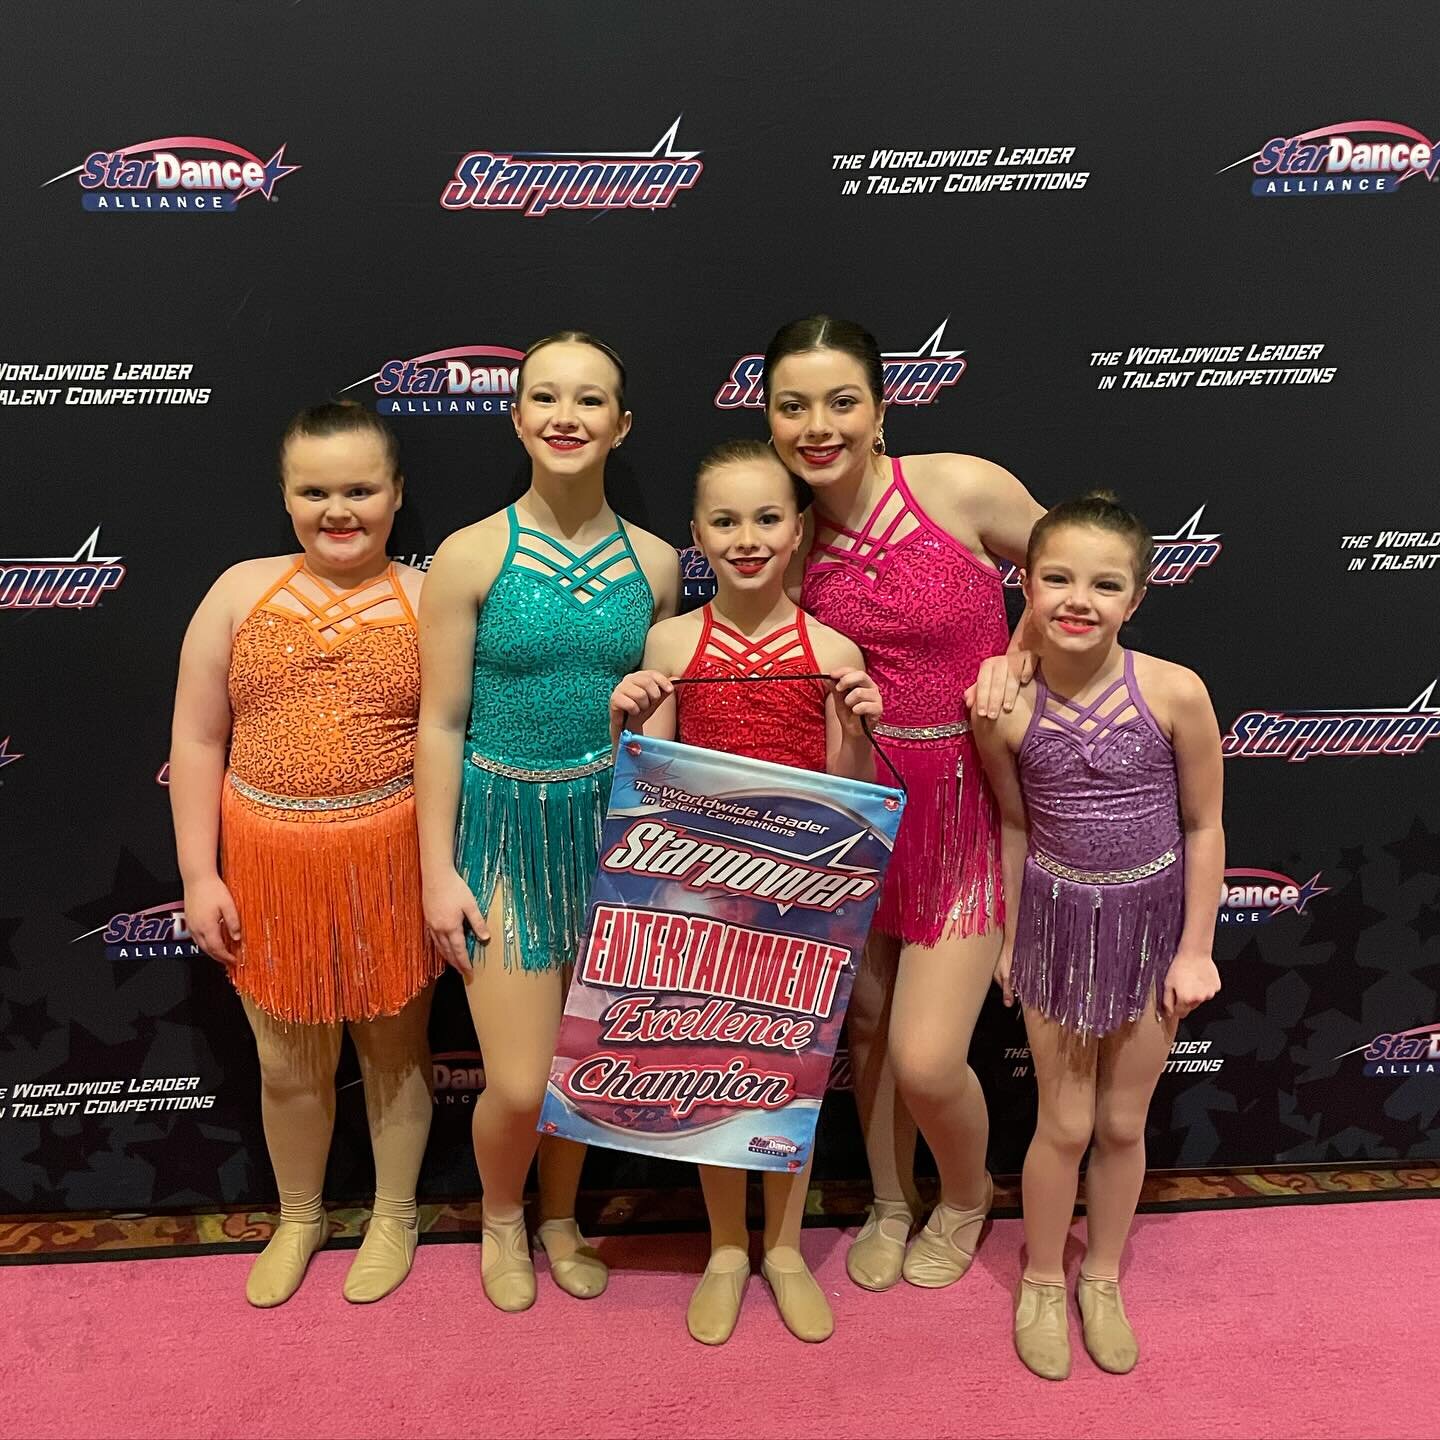 These ladies have been SLAYING the stage in Syracuse!! Radar- 1st in category &amp; &ldquo;Werkkk It&rdquo; Award! Show off- Entertainment Award. Mia- WILD Dance intensive- FULL SCHOLARSHIP! 1st overall &amp; her in category for her Vocal performance